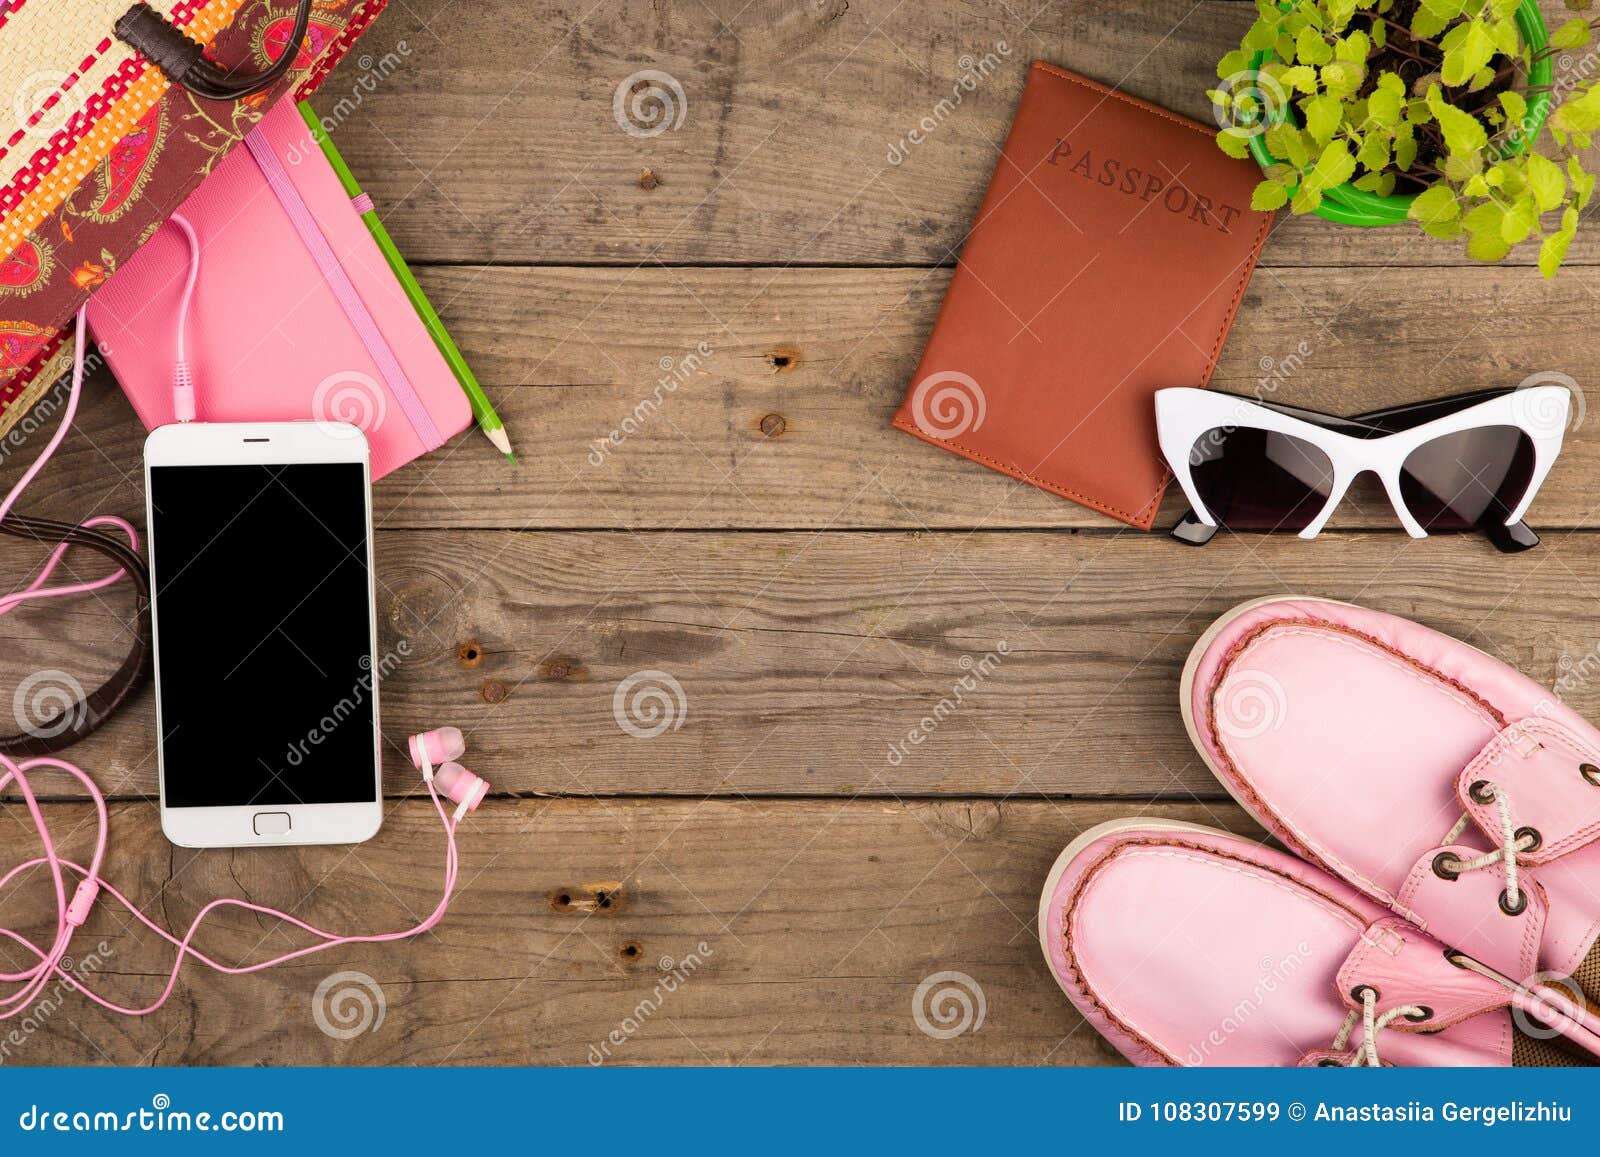 Straw Bag, Smart Phone, Headphones, Sunglasses, Notepad, Pink Shoes and ...